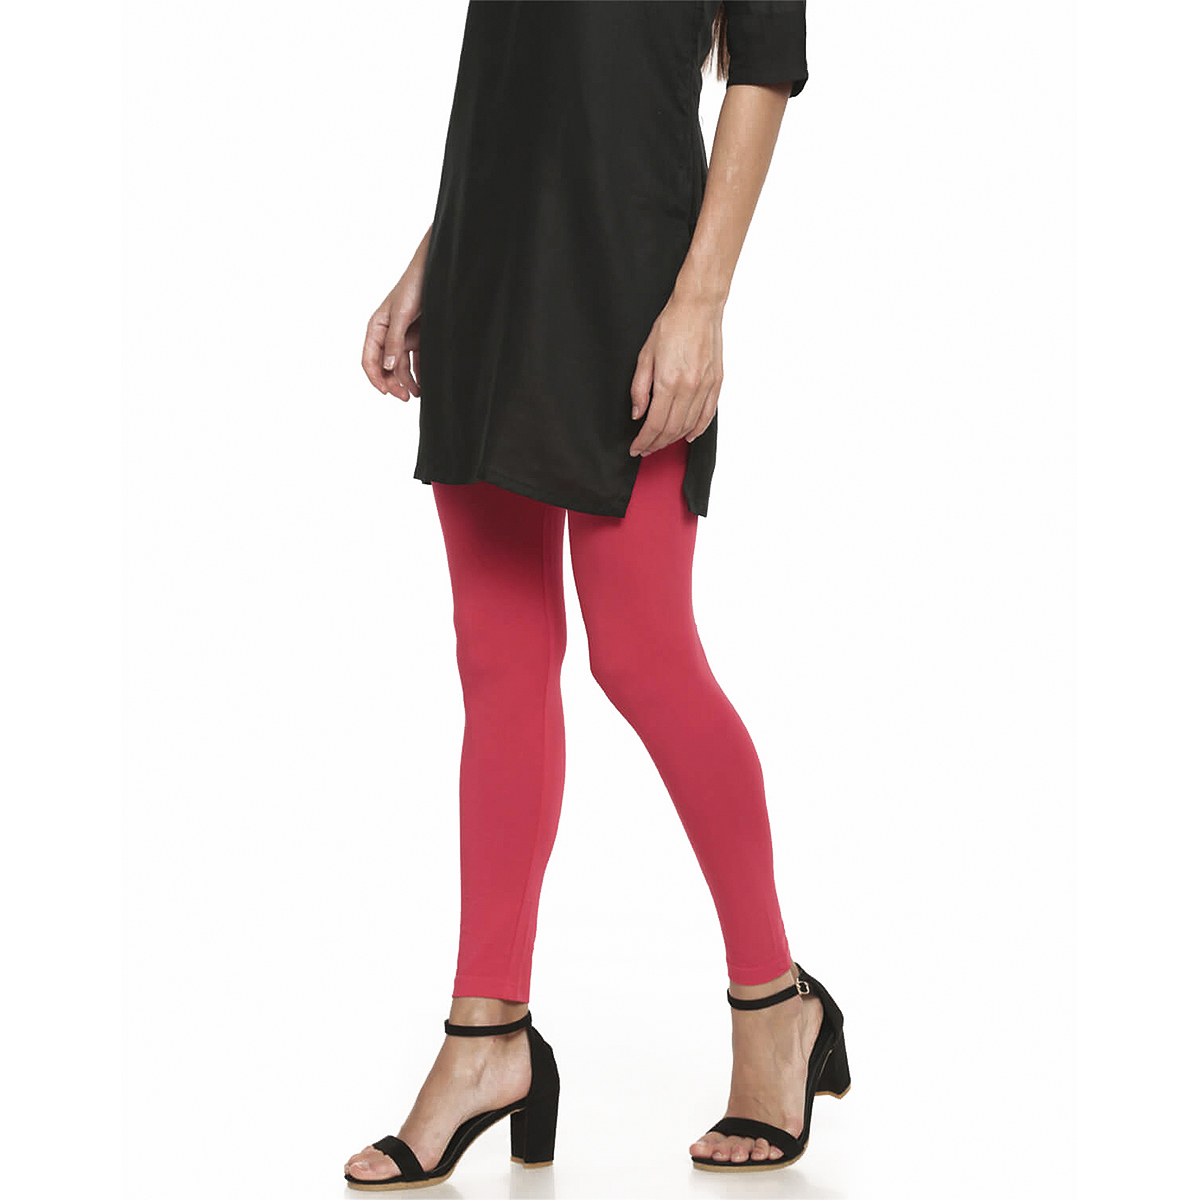 Go Colors Women Solid Color Ankle Length Legging - Bright Red